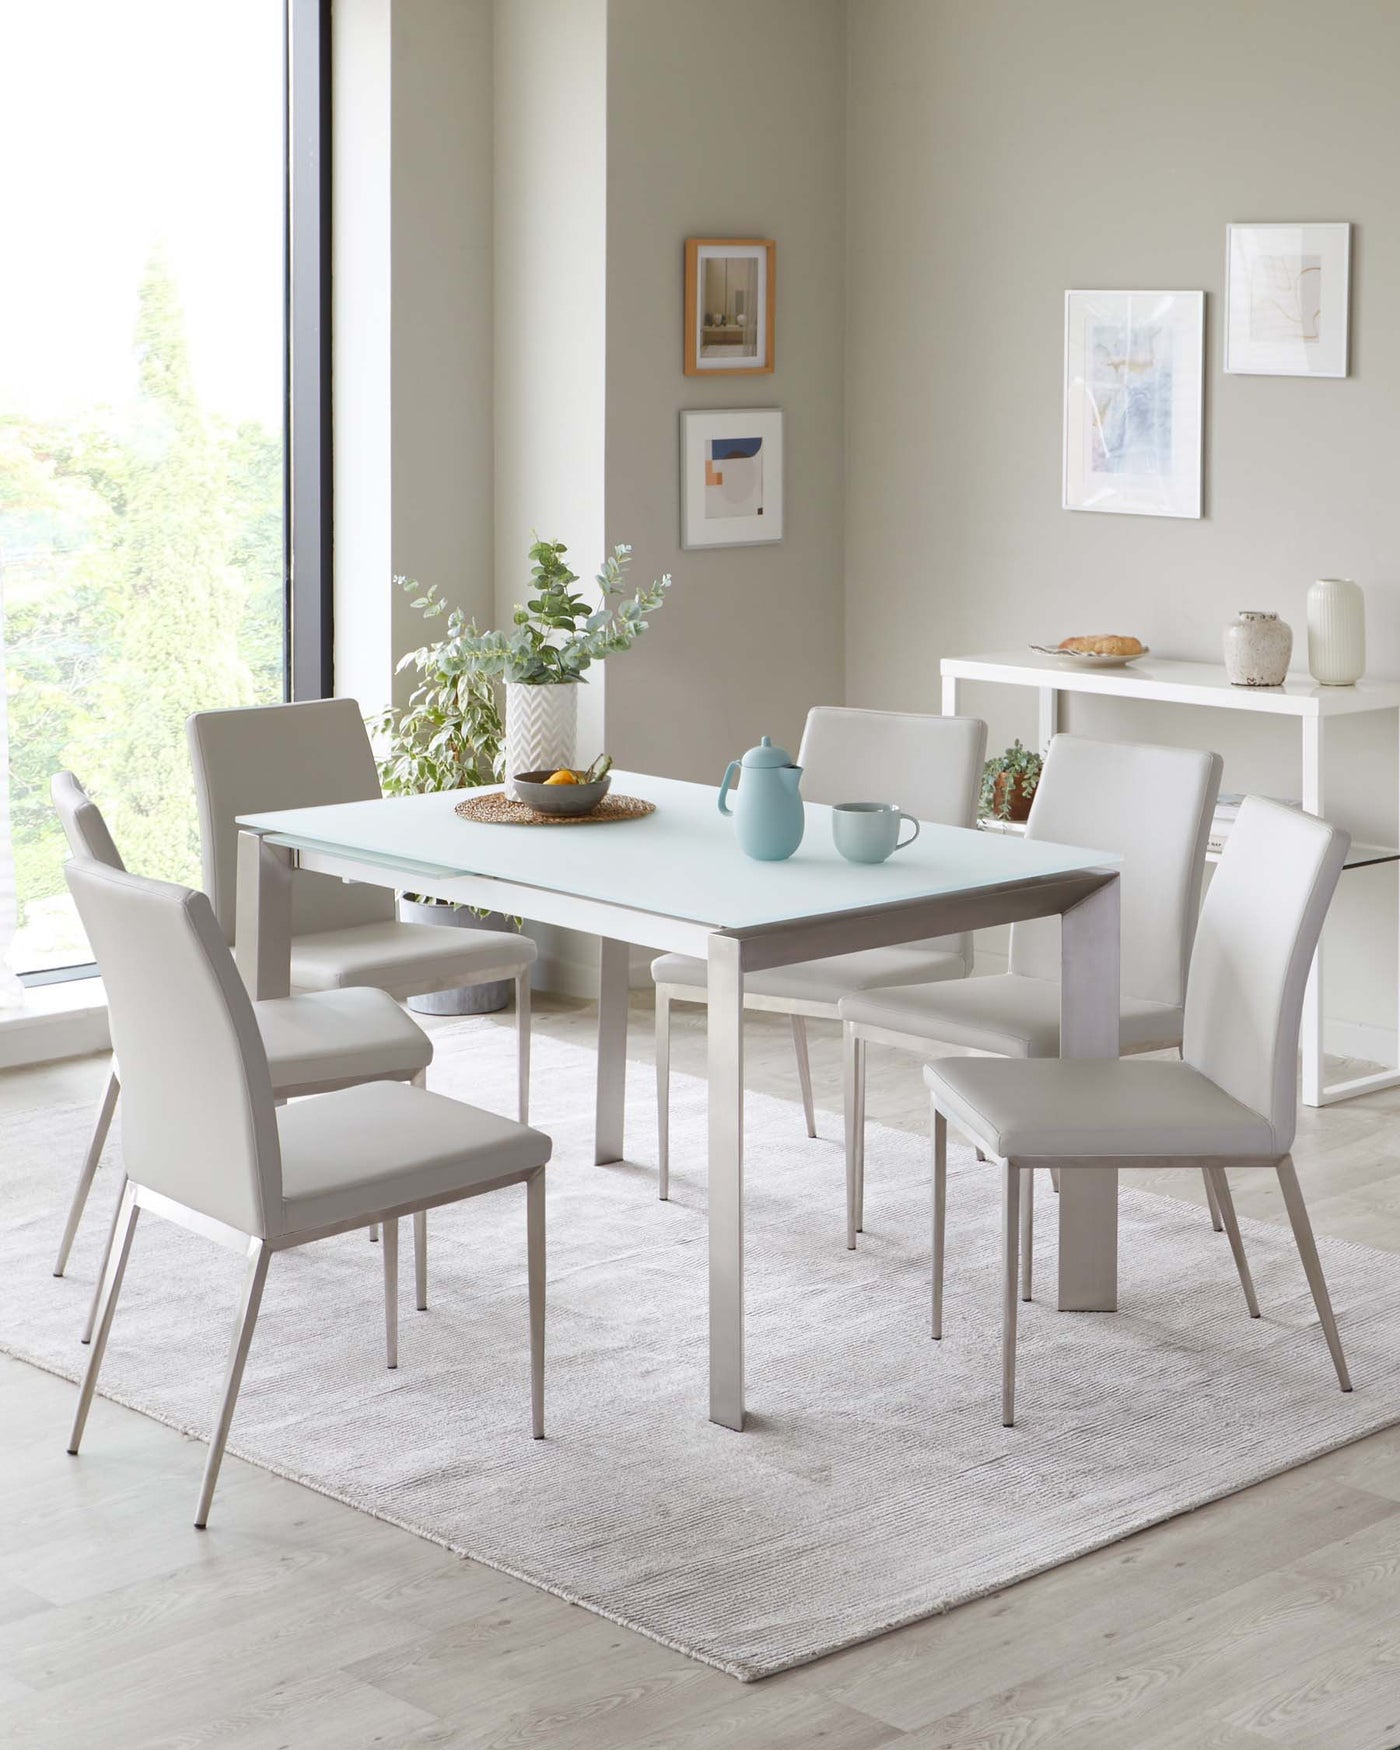 Modern minimalist dining furniture set featuring a clean-lined white rectangular table and six sleek white upholstered chairs on a light grey area rug. A small white console table is also present against the wall.